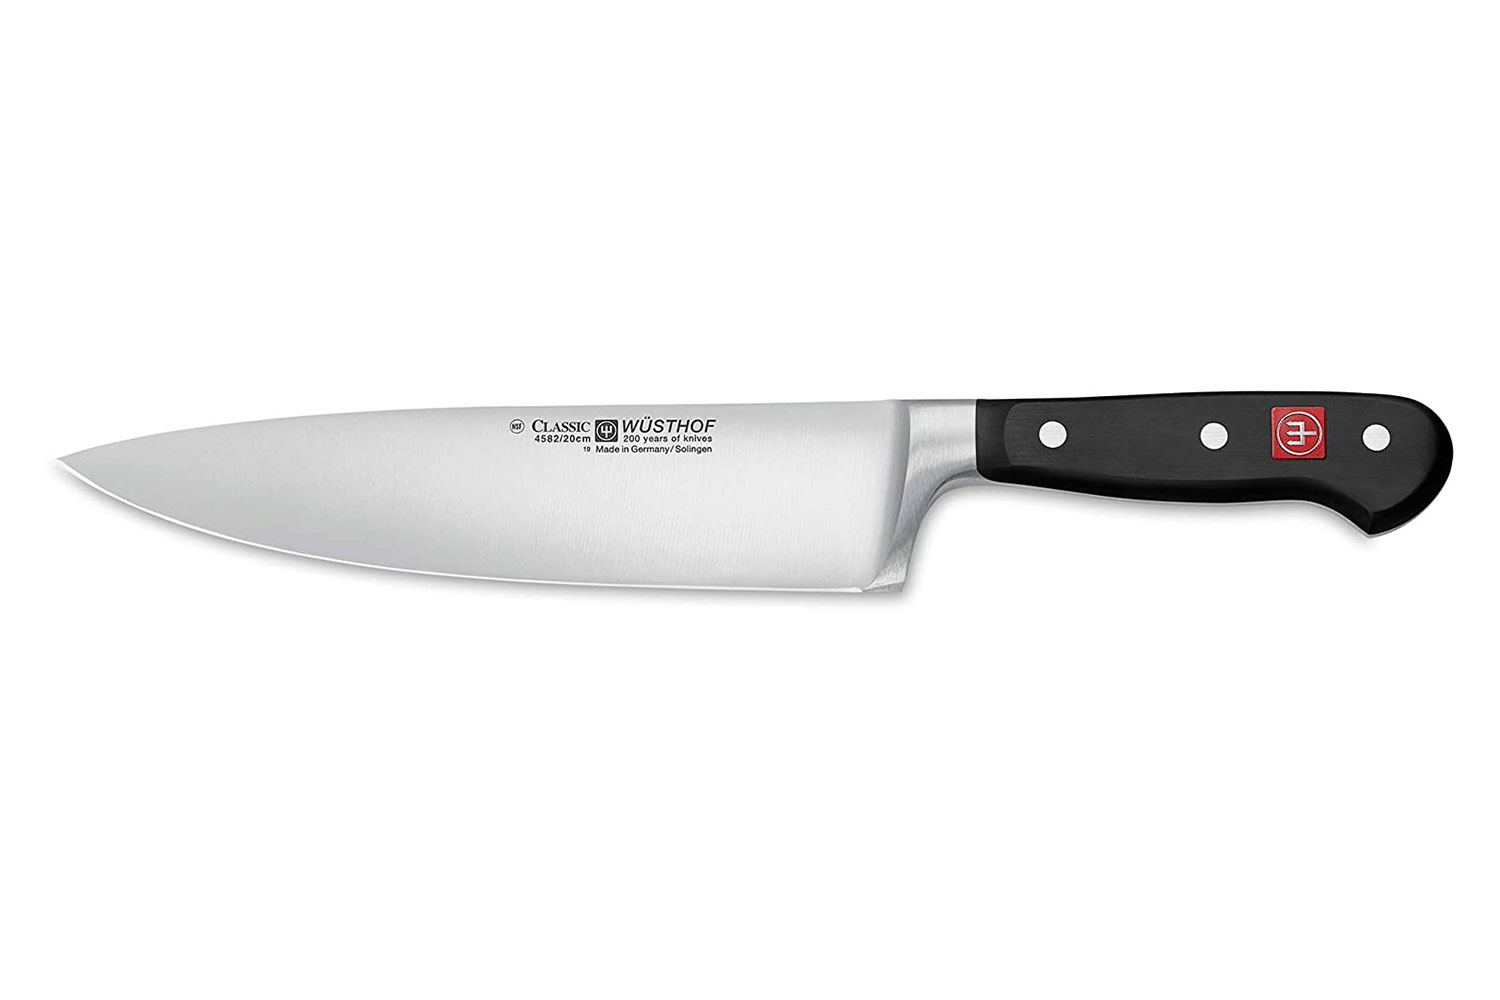 Less Common Kitchen Knives and Their Diverse Uses